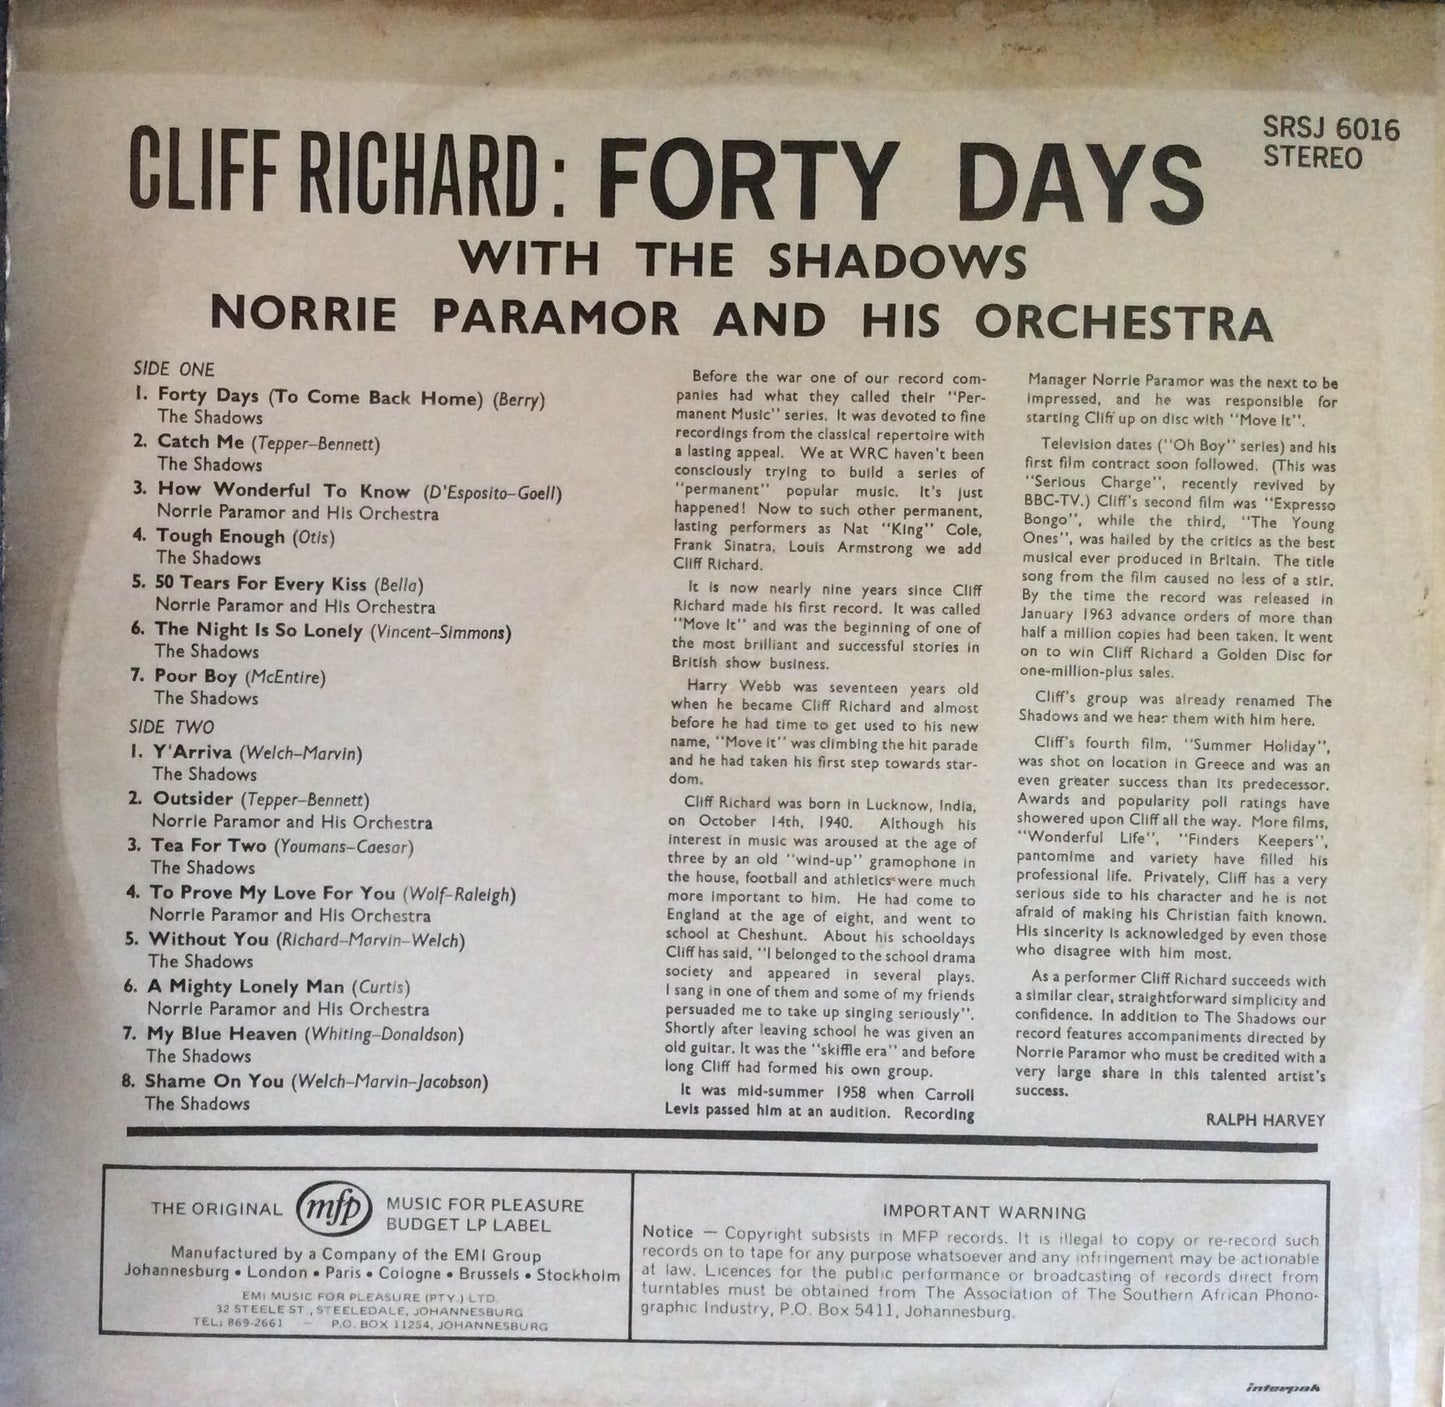 Cliff Richard - Forty Days